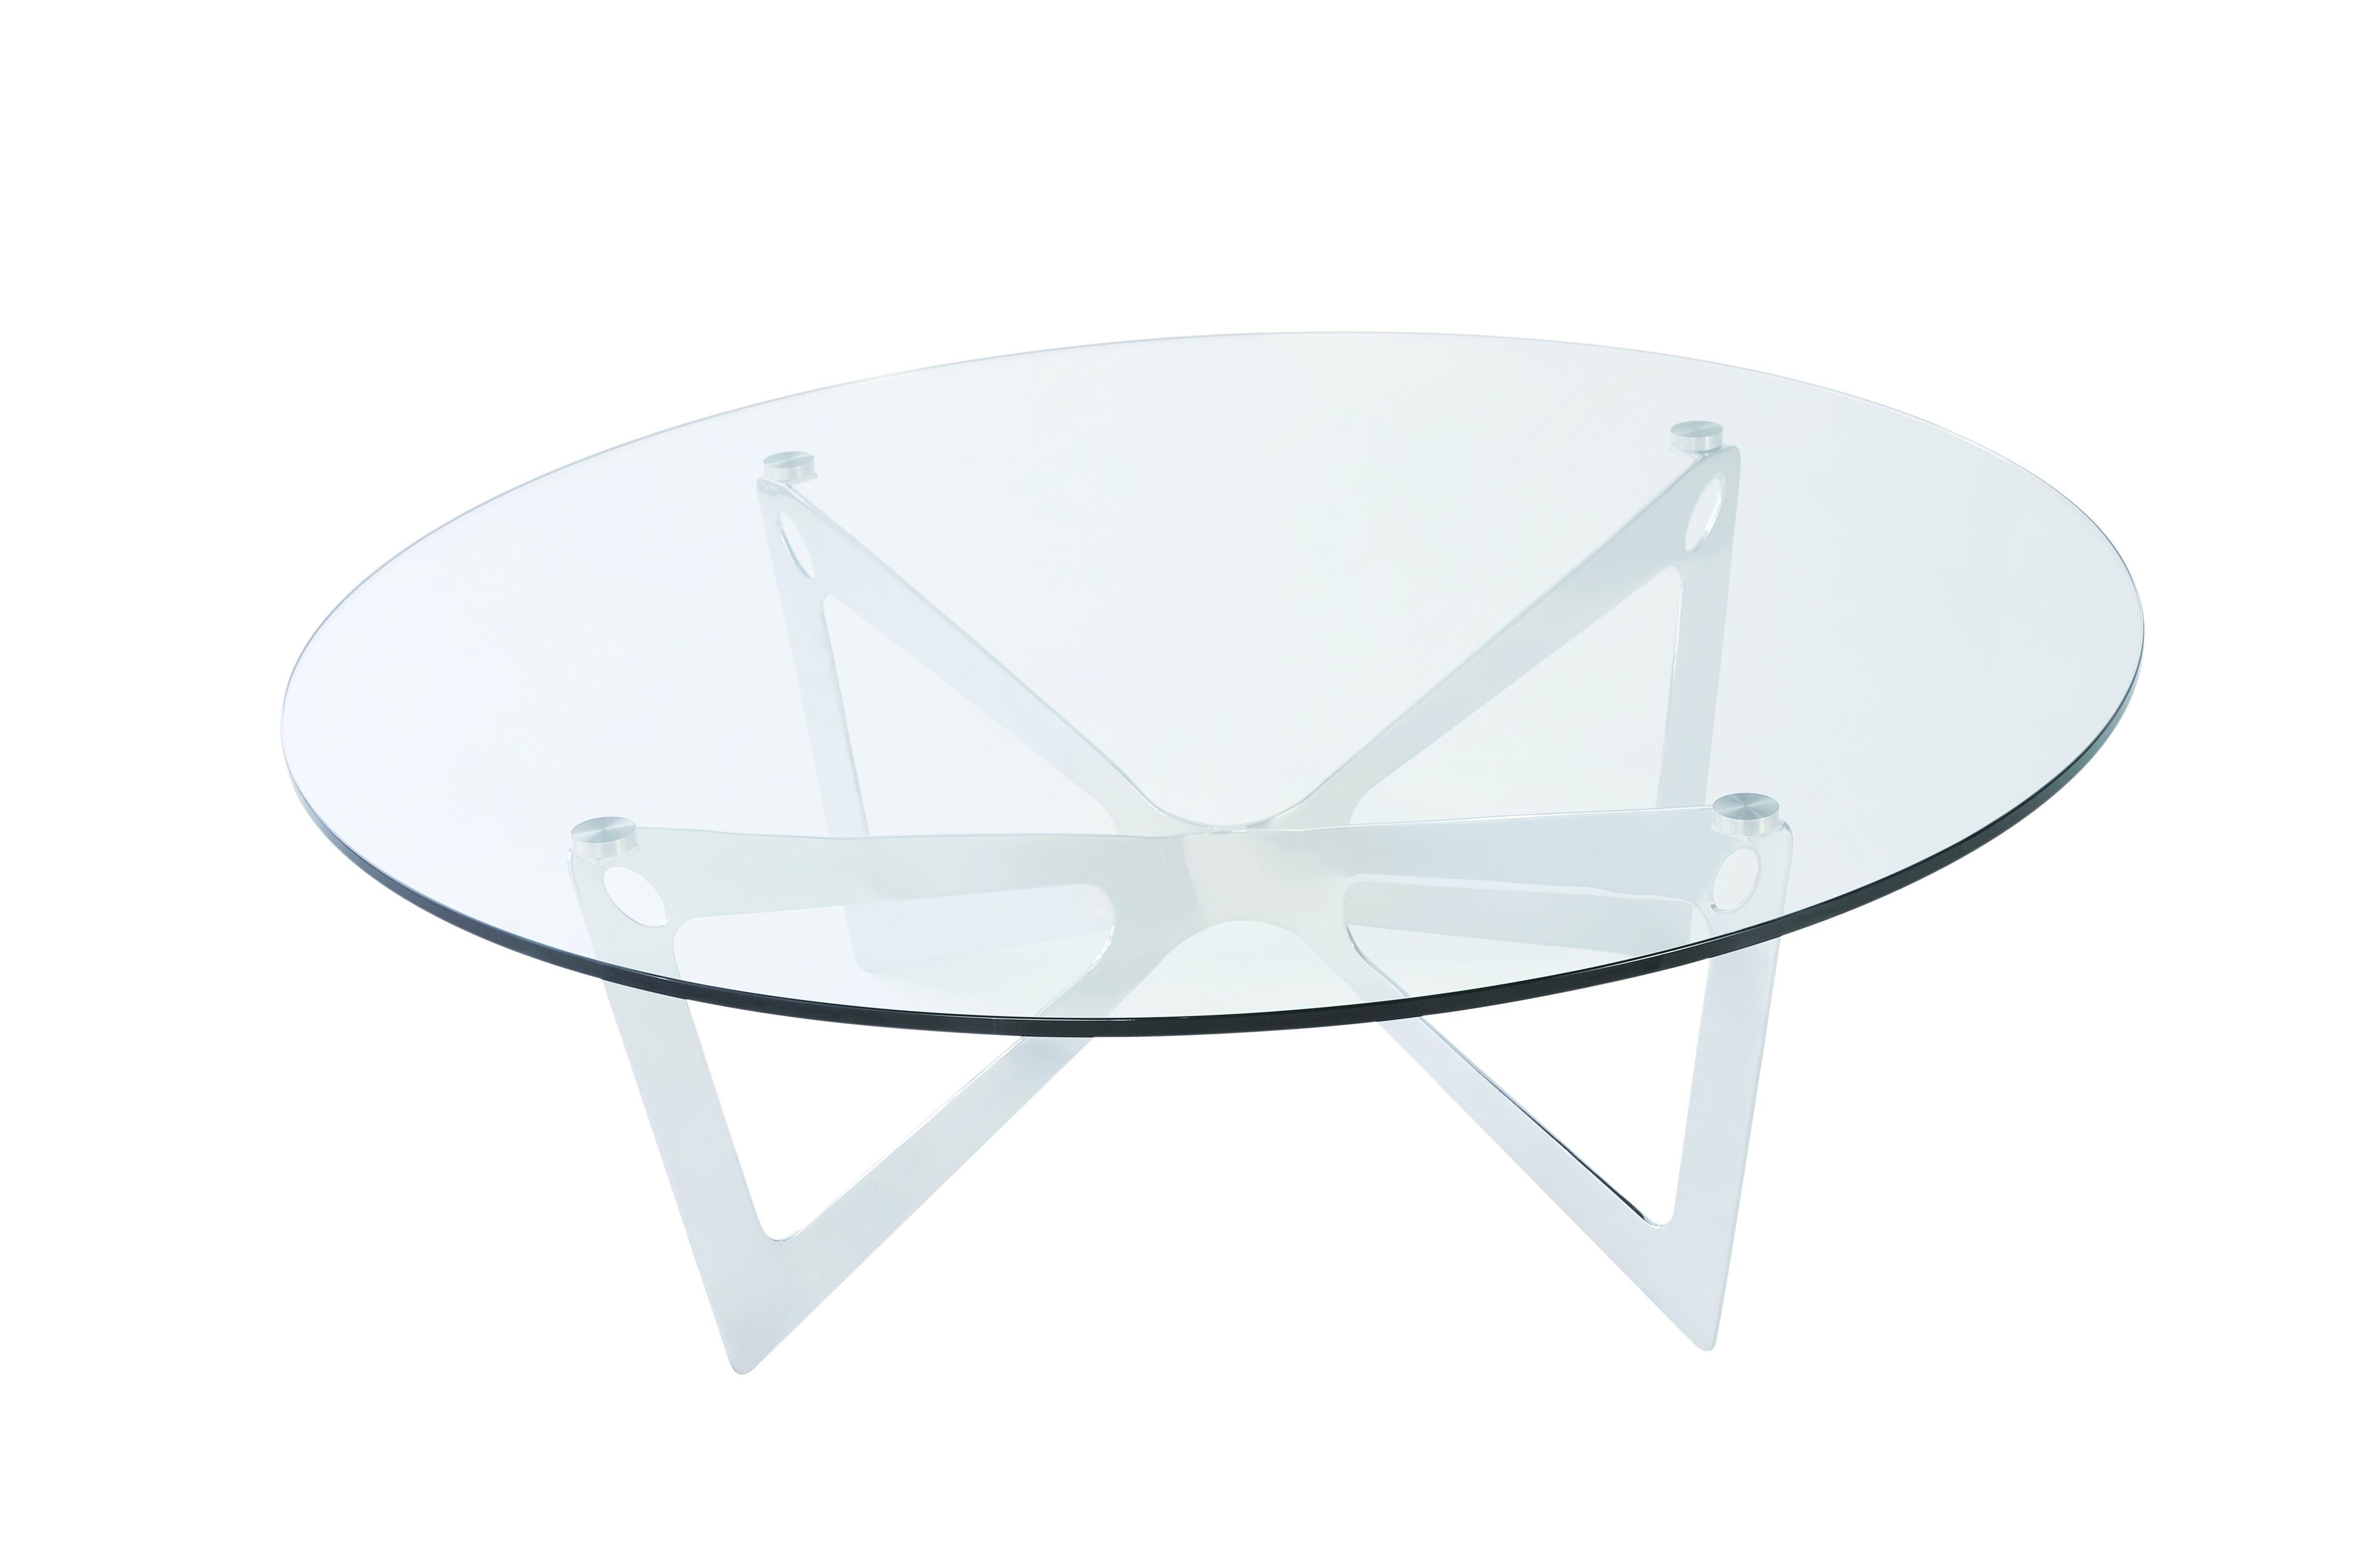 Small Round Glass Coffee Table Living Room Furniture Contemporary Round Glass Top Coffee Table With Chrome Metal Multipedestal Base Round Coffee Table With Metal Legs (View 9 of 10)